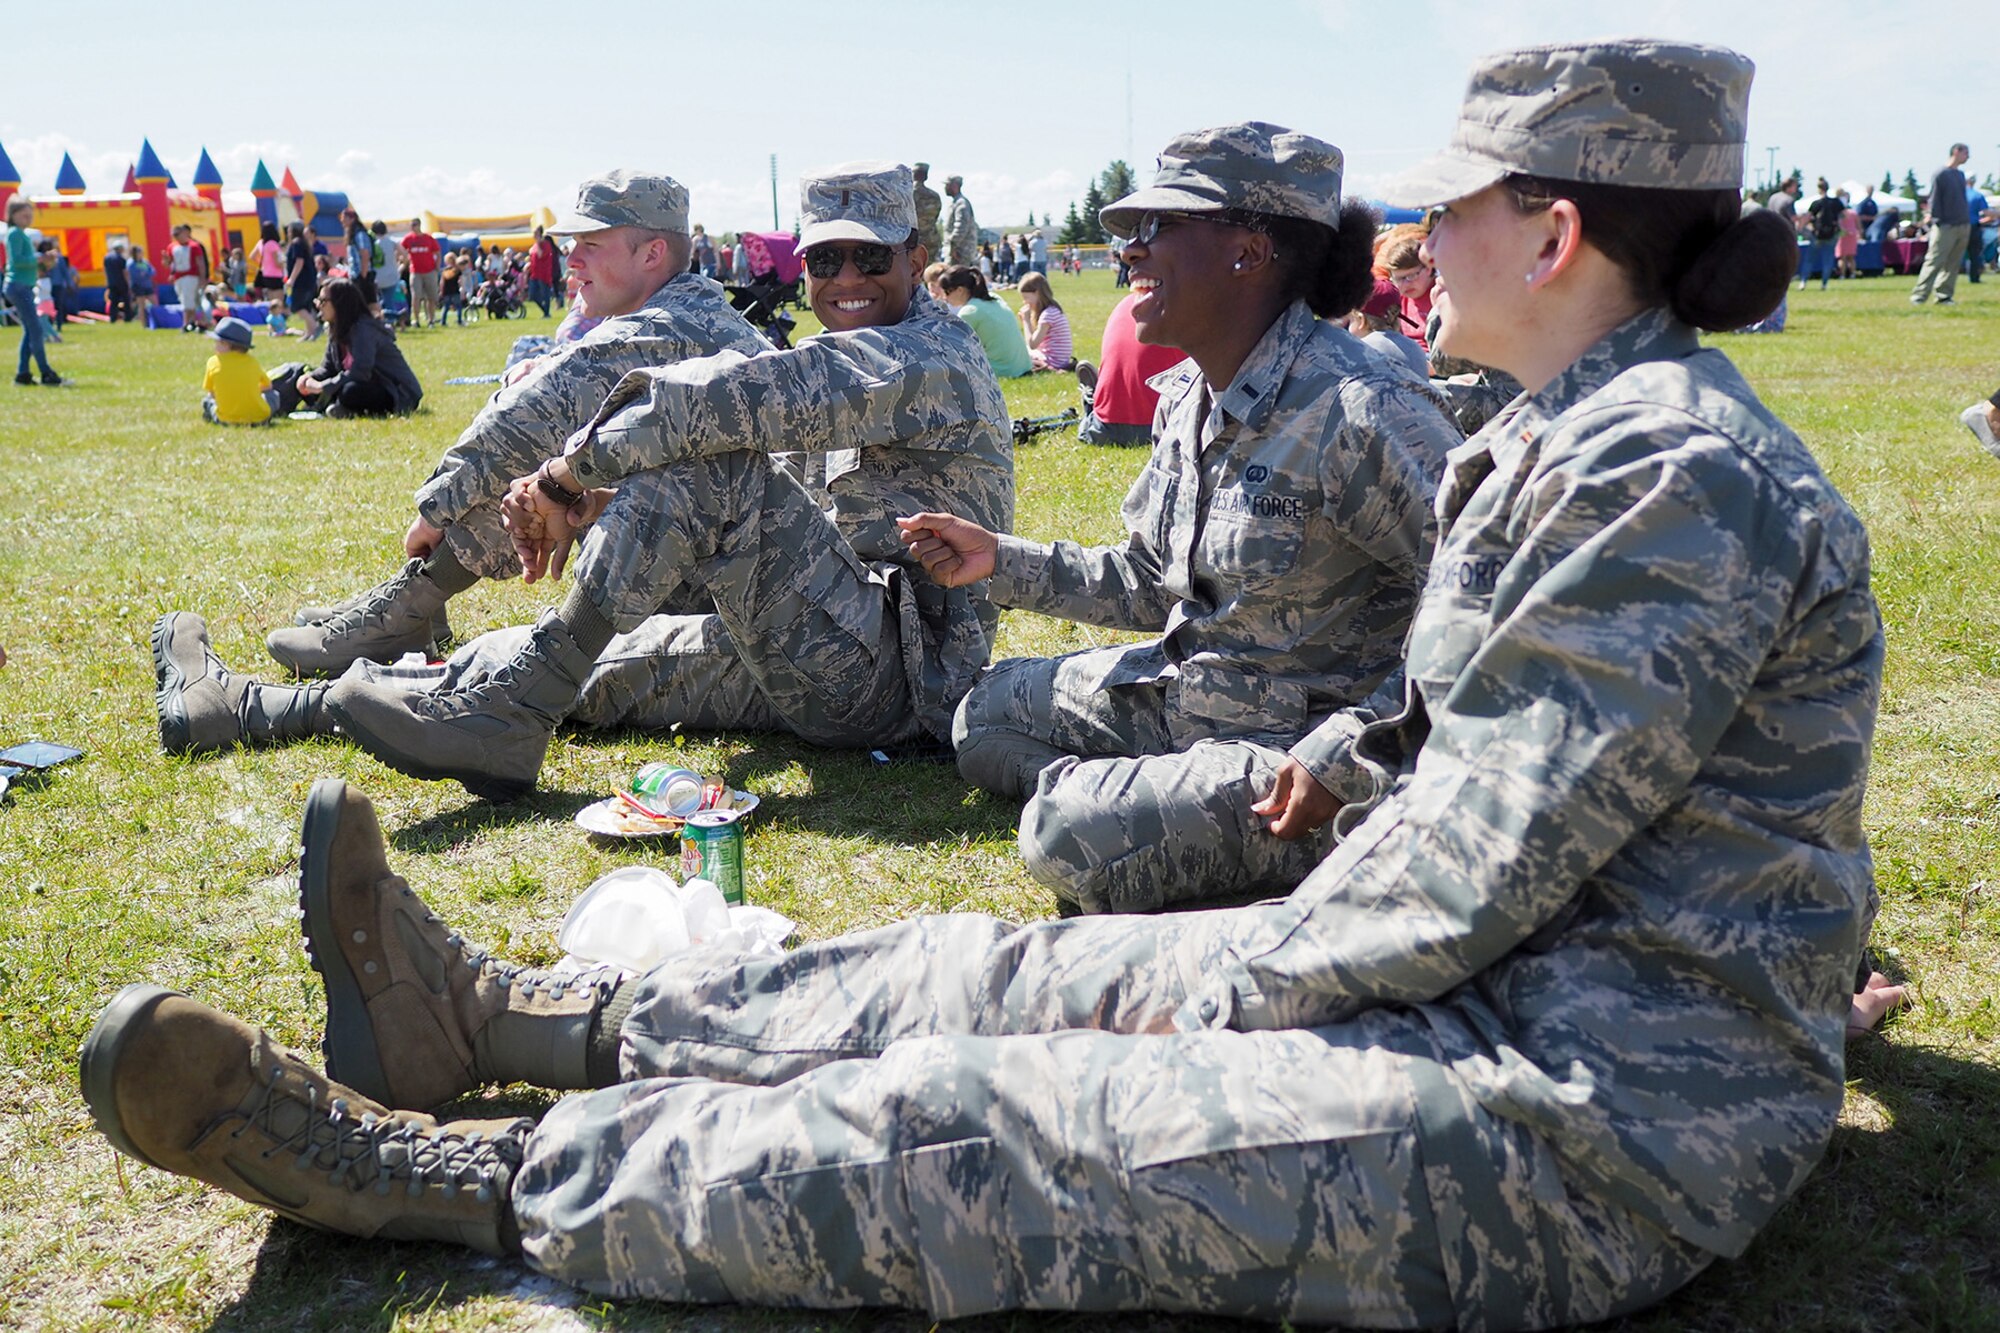 Air Force Airmen share a laugh as service members, dependents, and Department of Defense civilians attend the Military Appreciation Week picnic at the Joint Base Elmendorf-Richardson, Alaska, Buckner Fitness Center fields June 16, 2017. Several organizations came together to provide a variety of family-fun activities such as competitive sporting events for the adults, face painting and bouncy houses for the children in addition to the Anchorage Chamber of Commerce-provided food and music during the annual event.